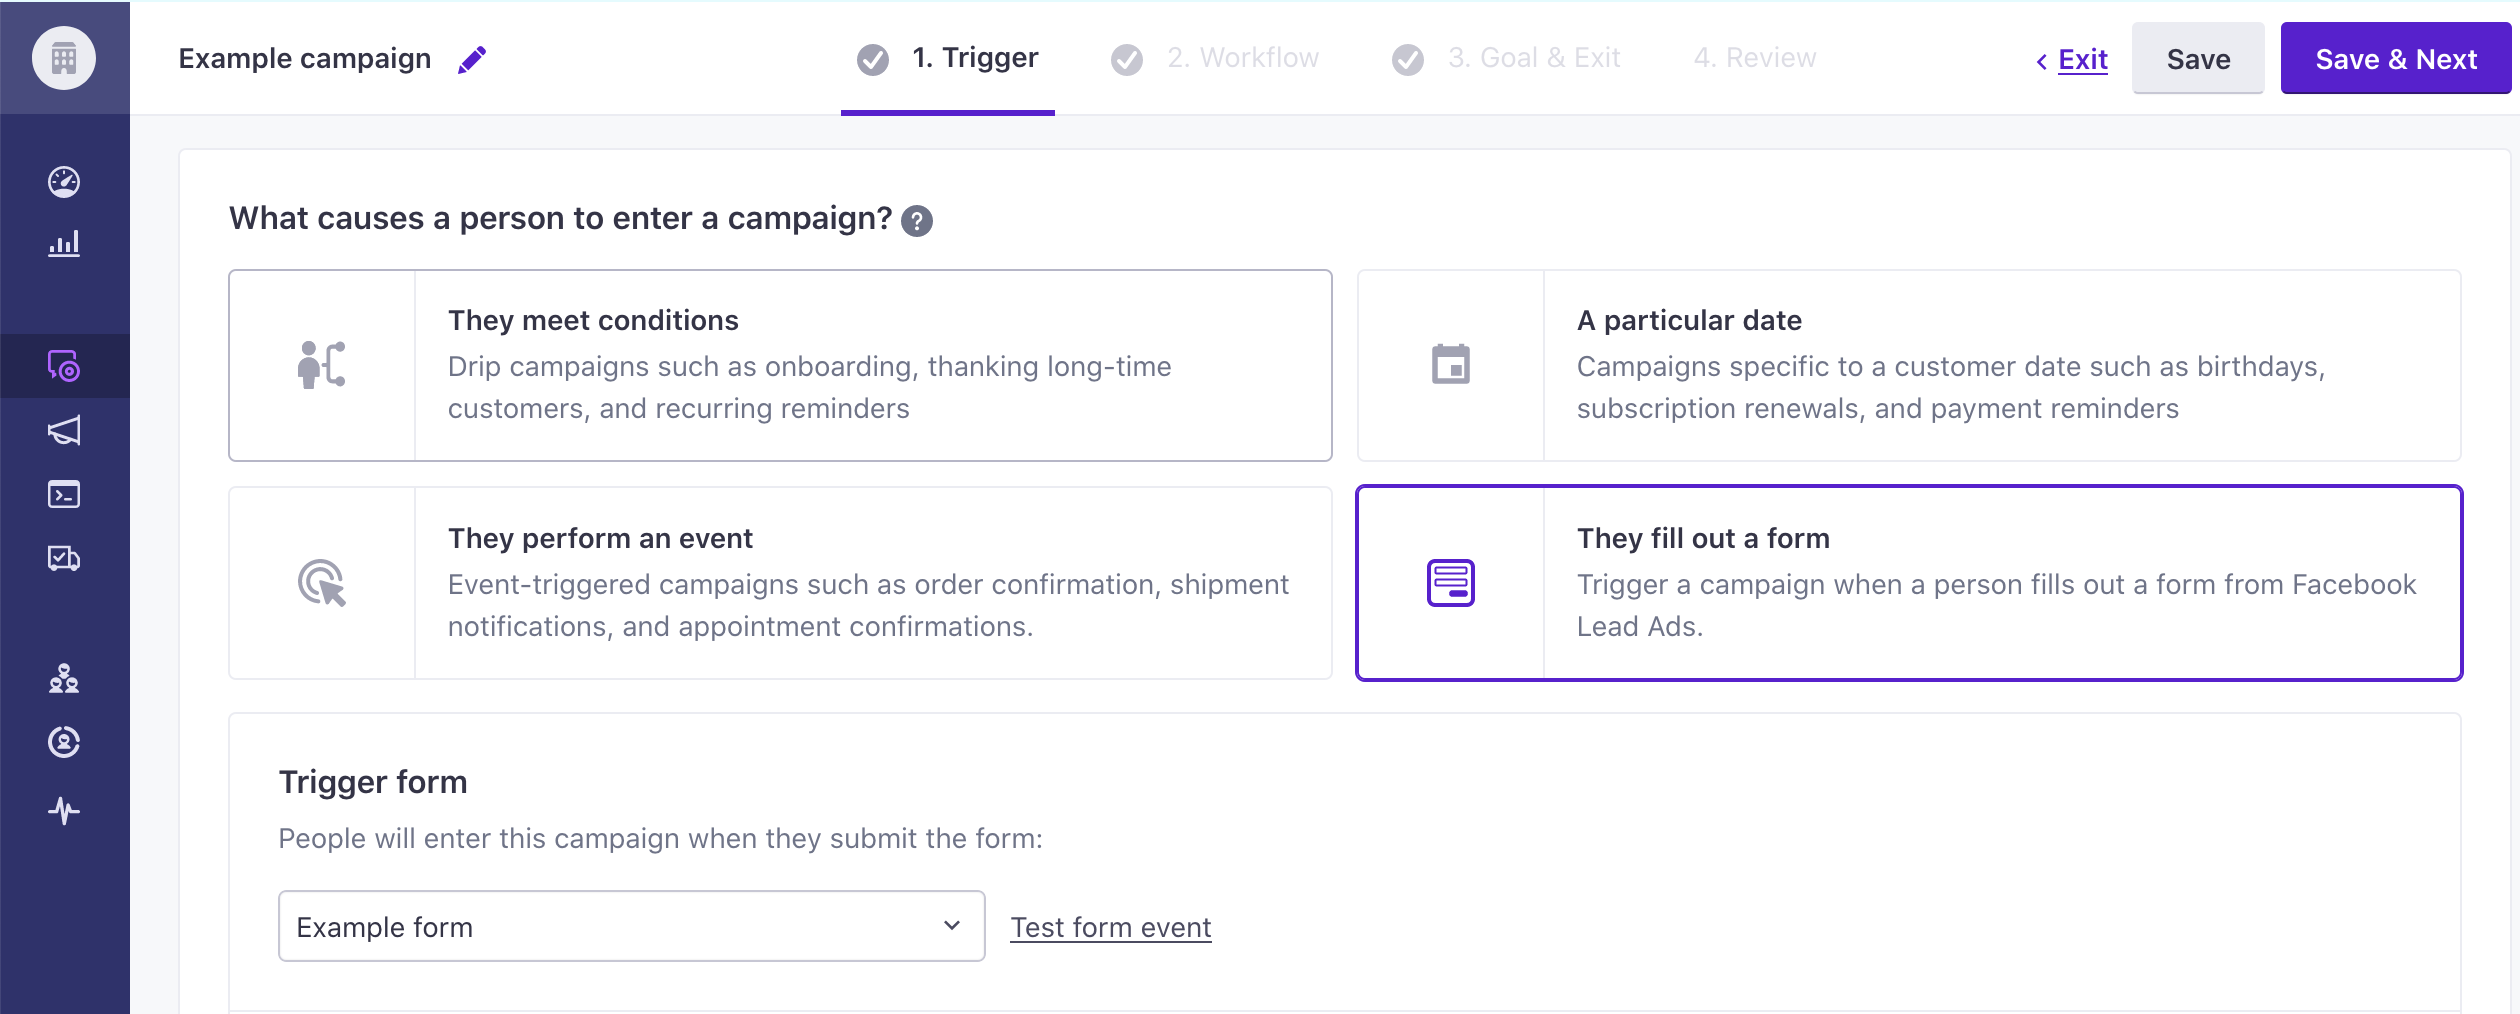 Trigger campaign from a lead ad form